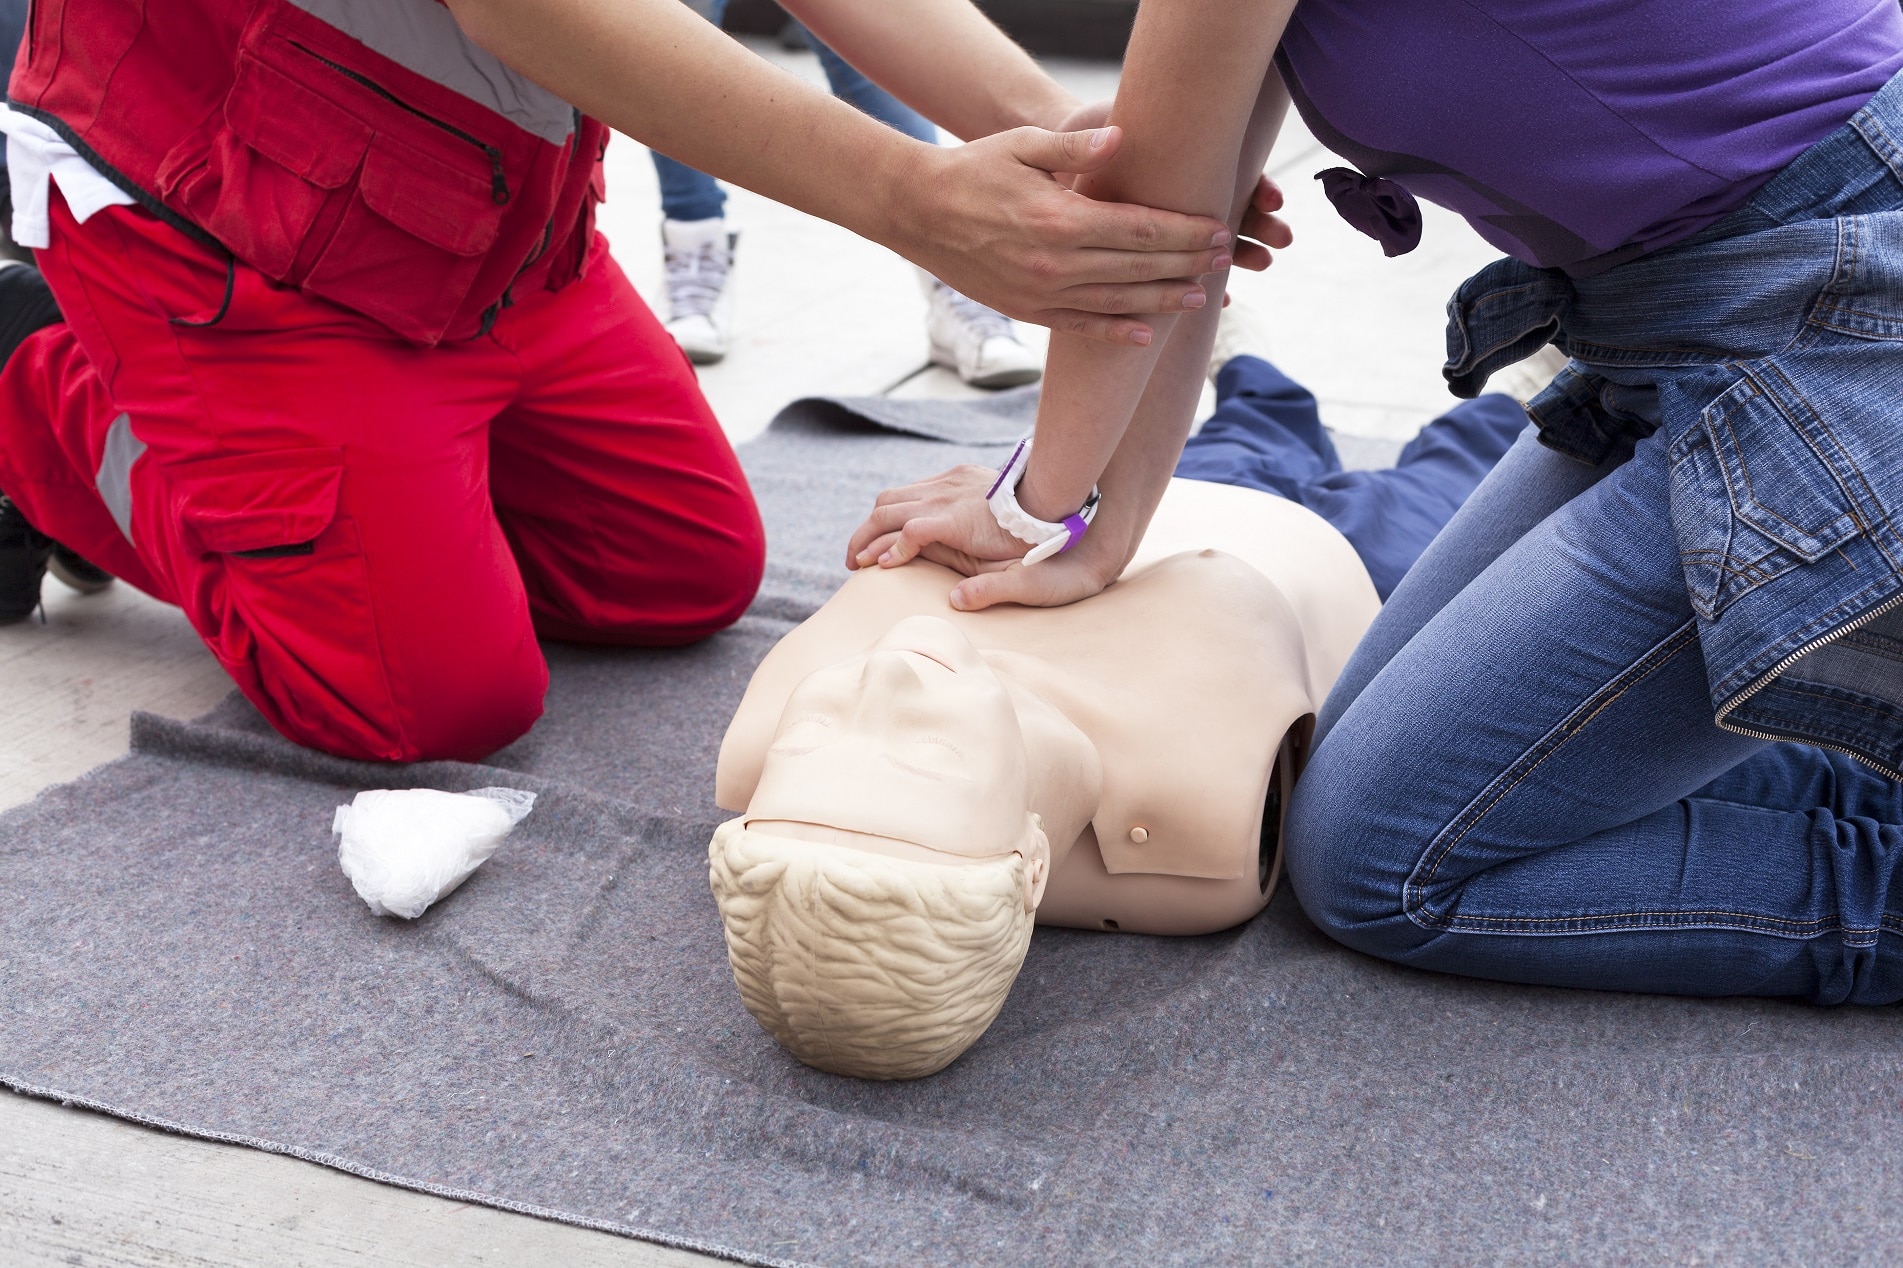 First Aid Cpr